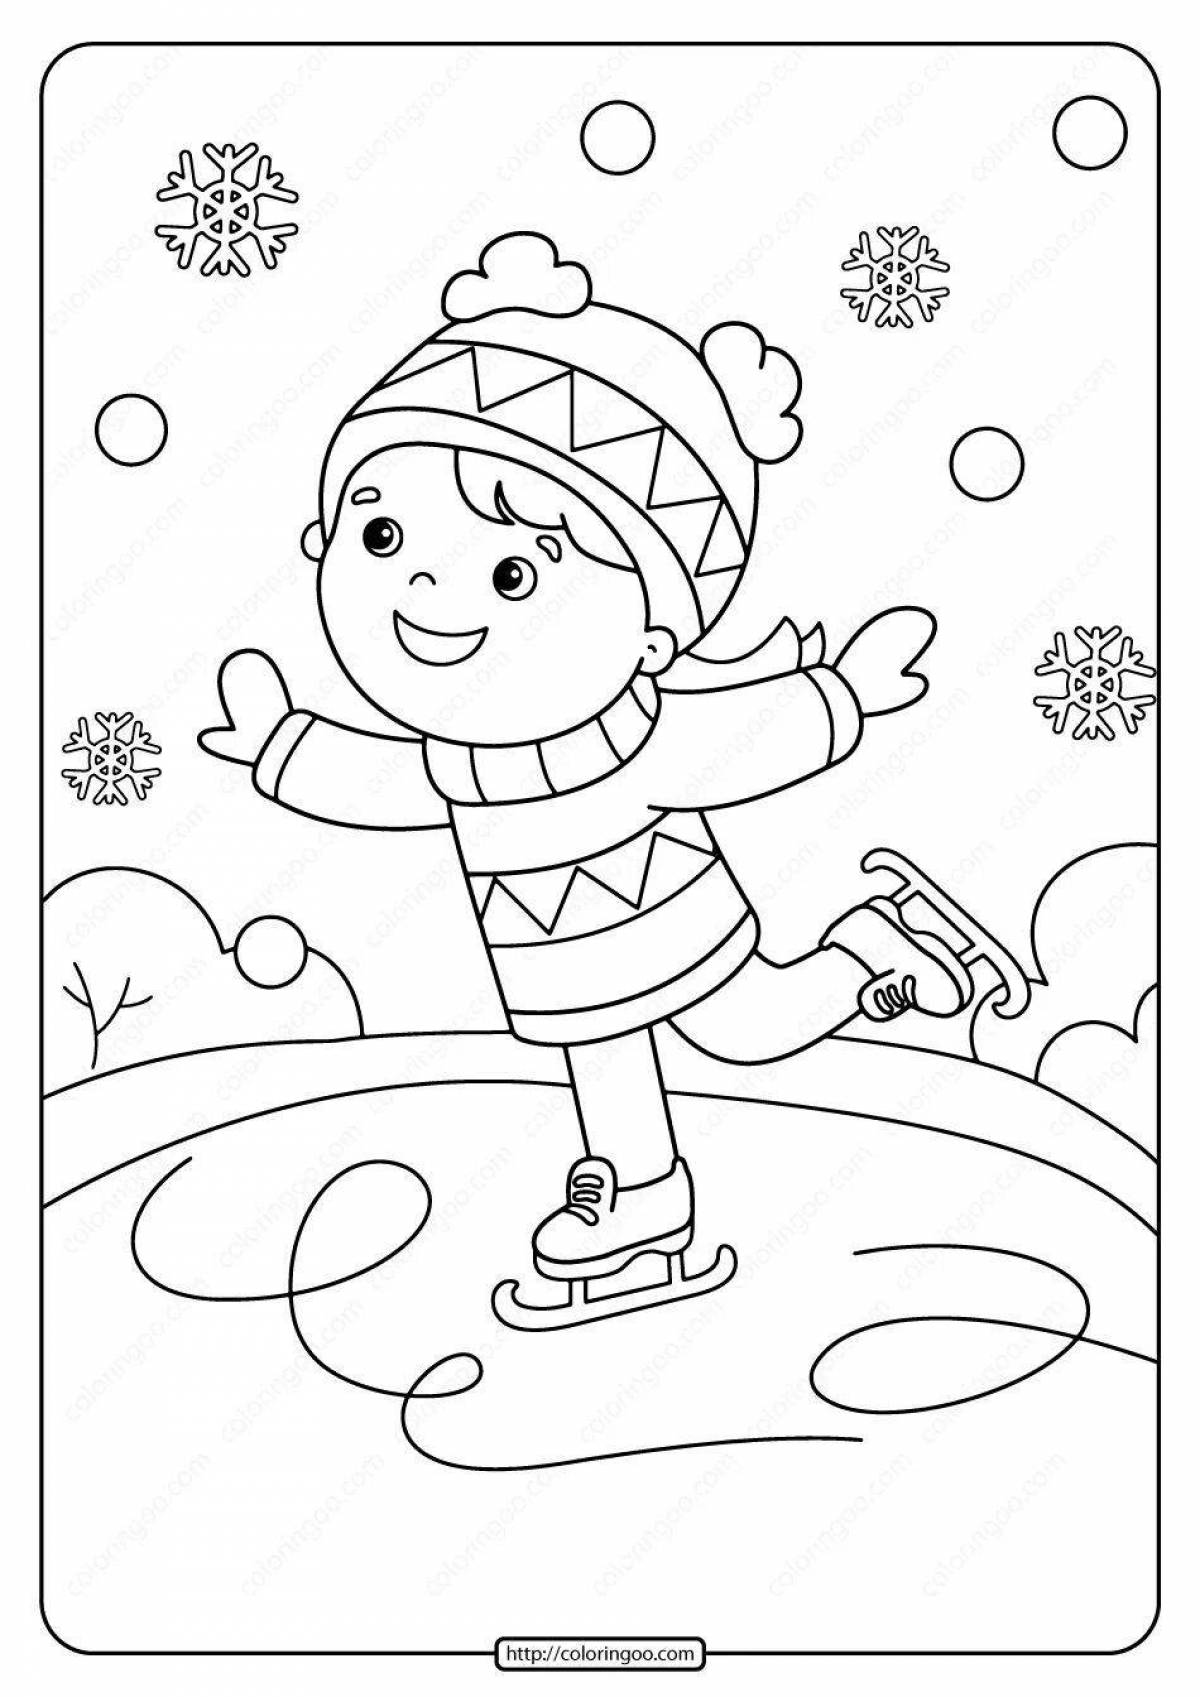 Children's coloring book about winter sports